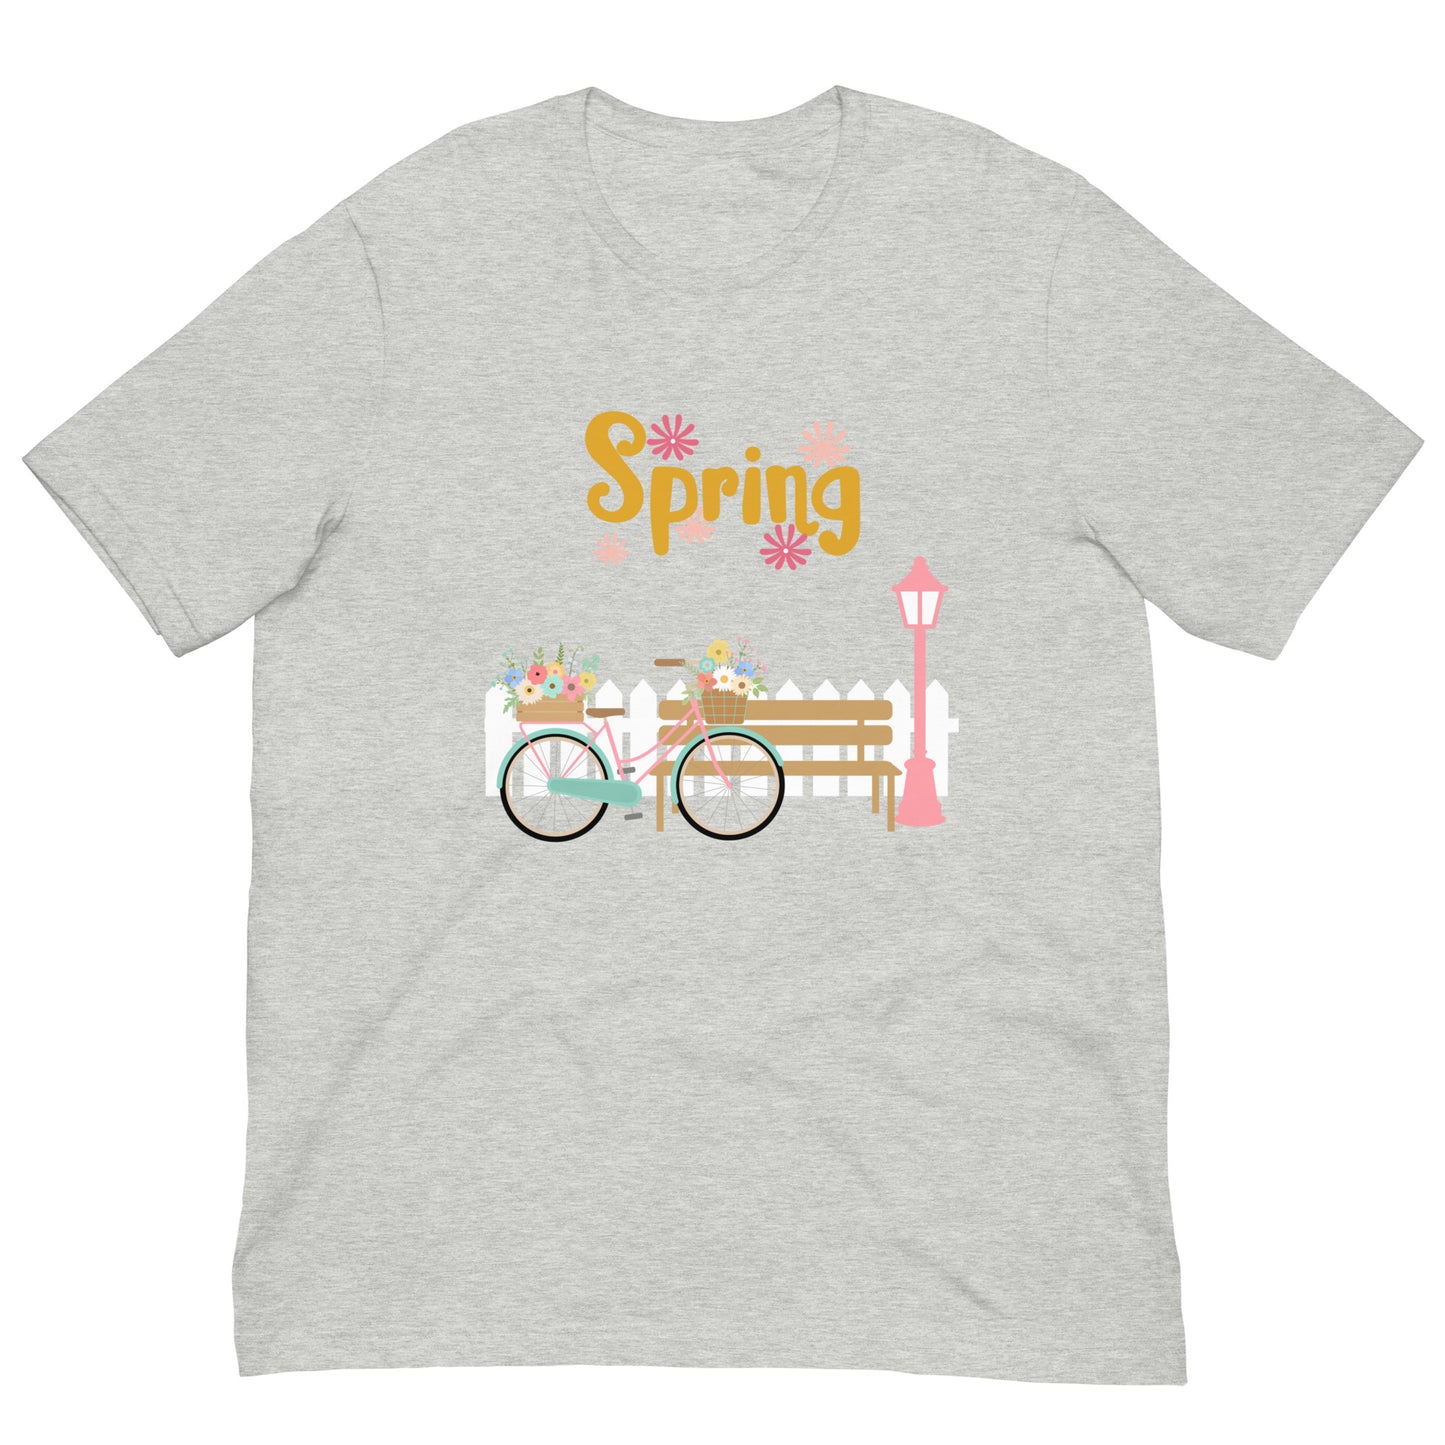 Unisex flower t-shirt, spring t-shirt, t-shirt with graphics, bicycle and flowers t-shirt in sunny spring, vibrant colors